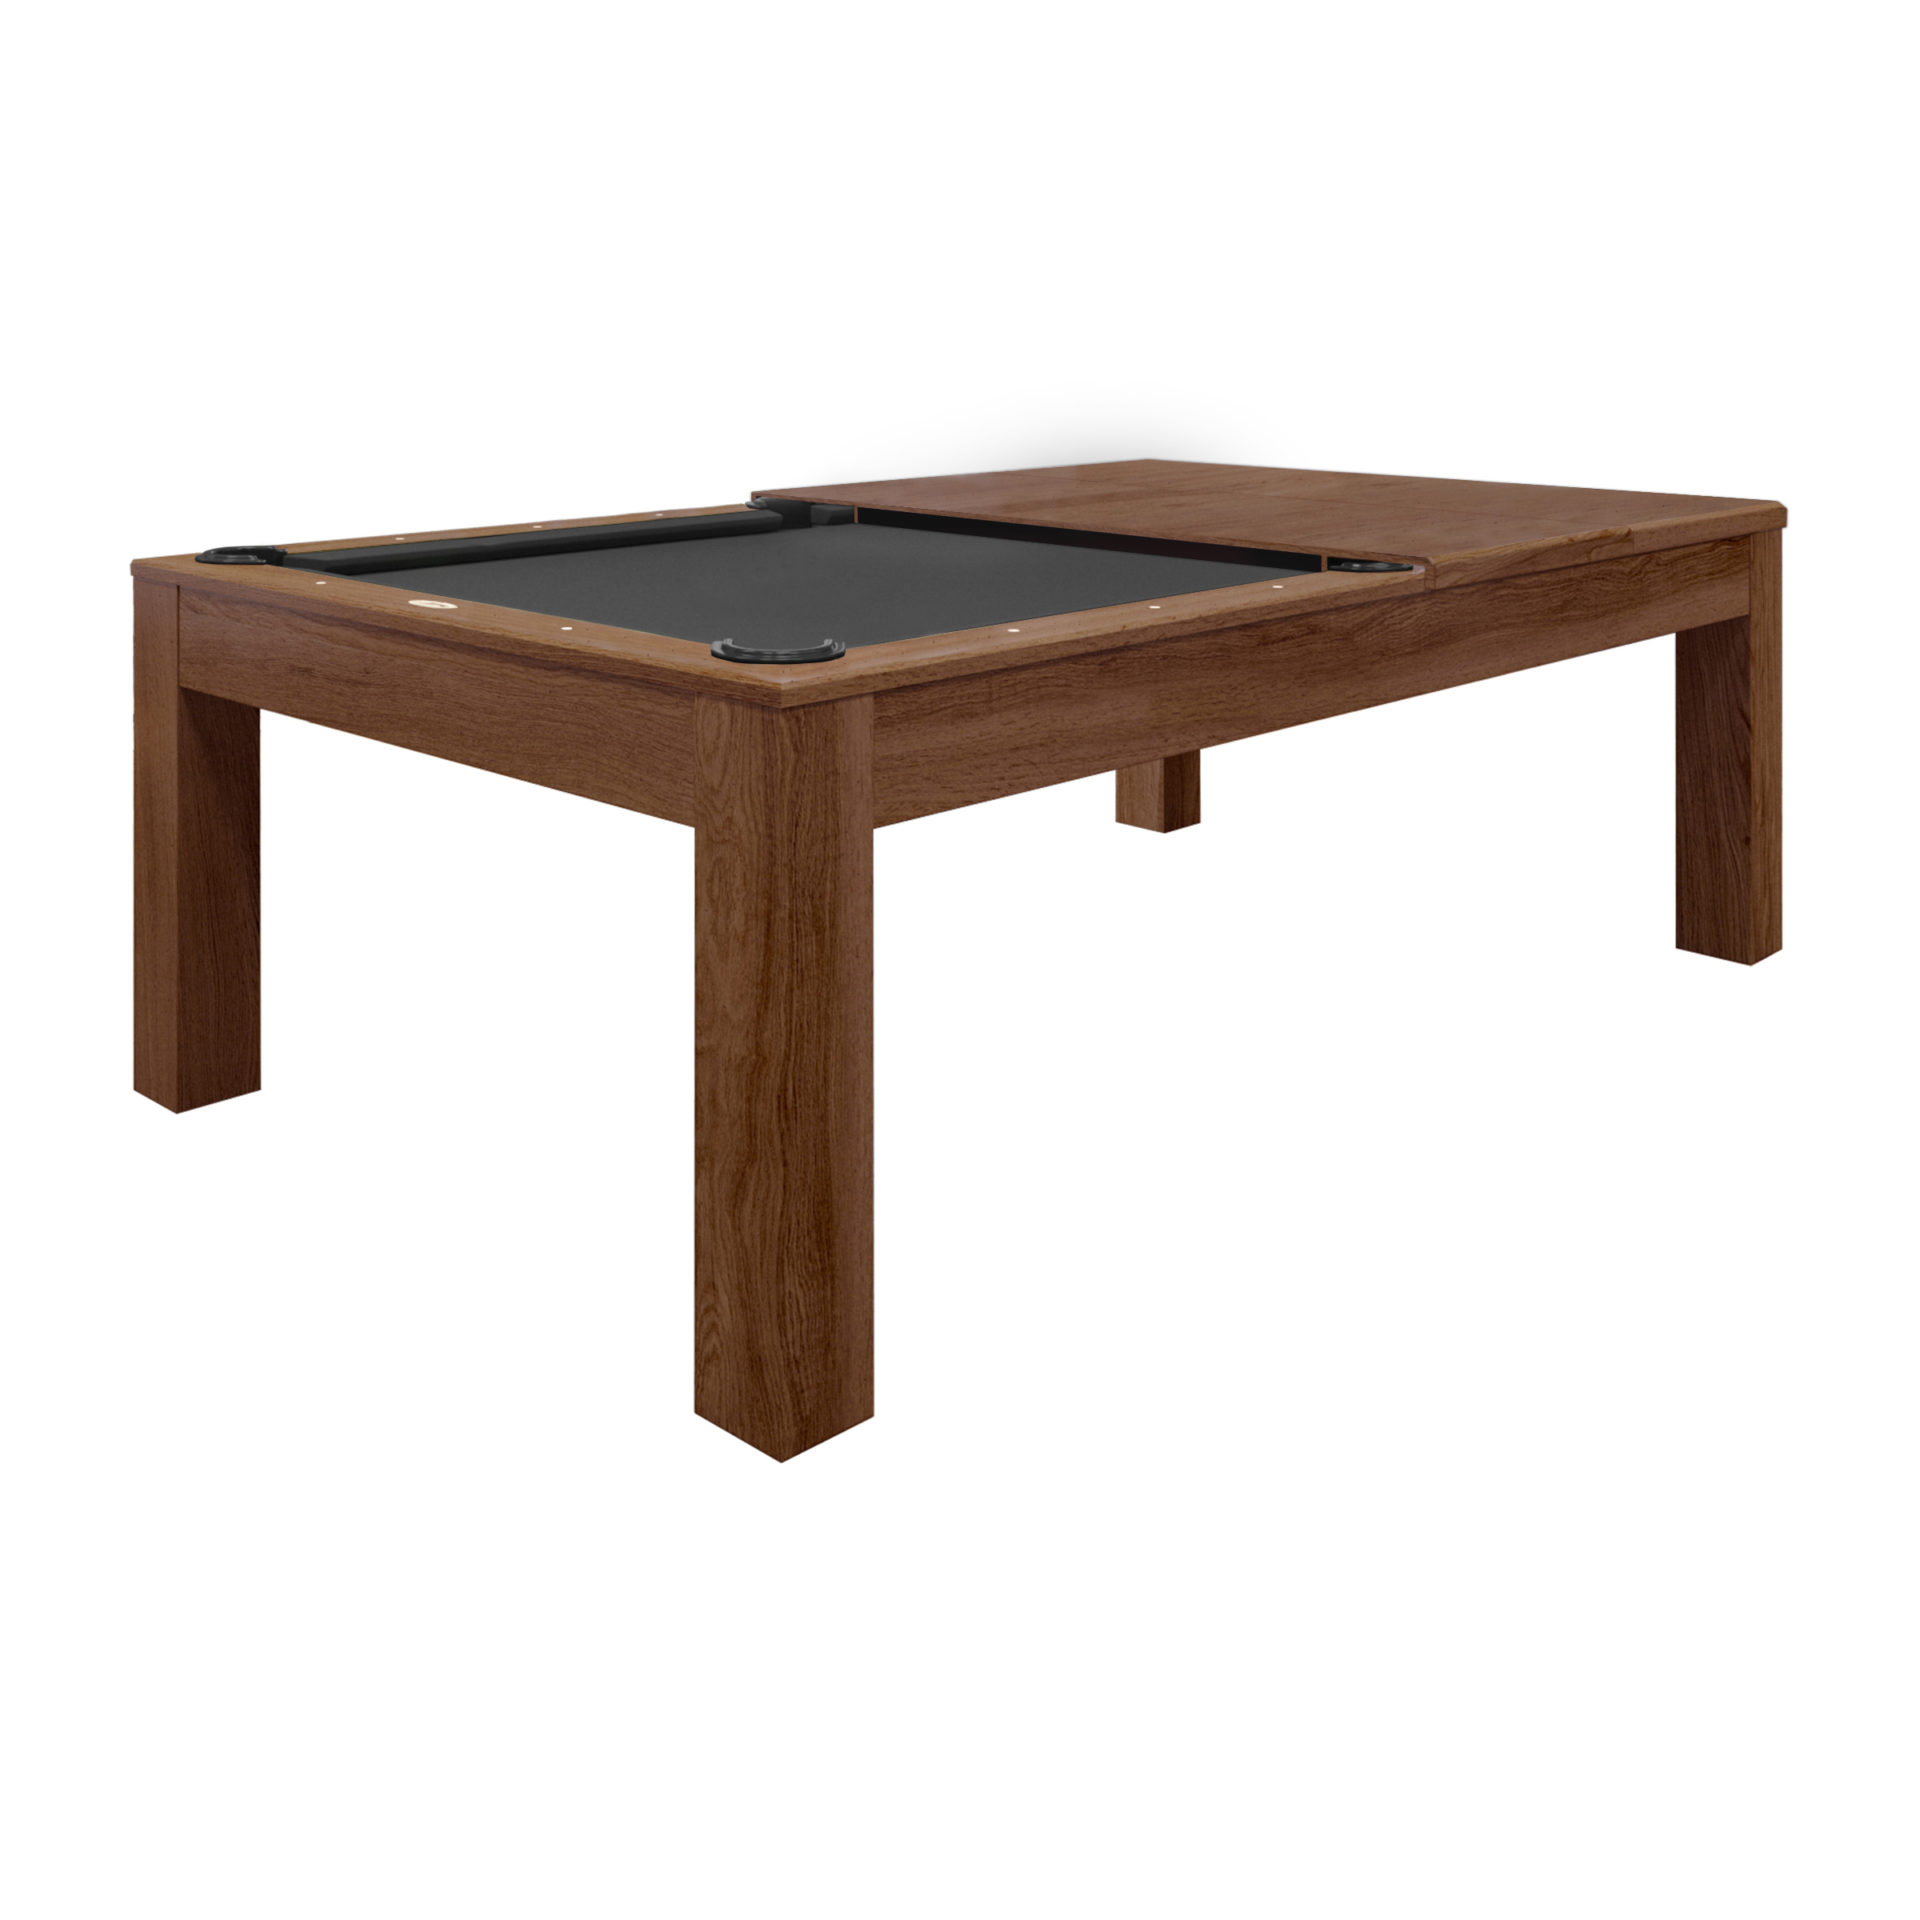 Penelope – Dining Top Included – Whiskey | Imagine That Pool Tables